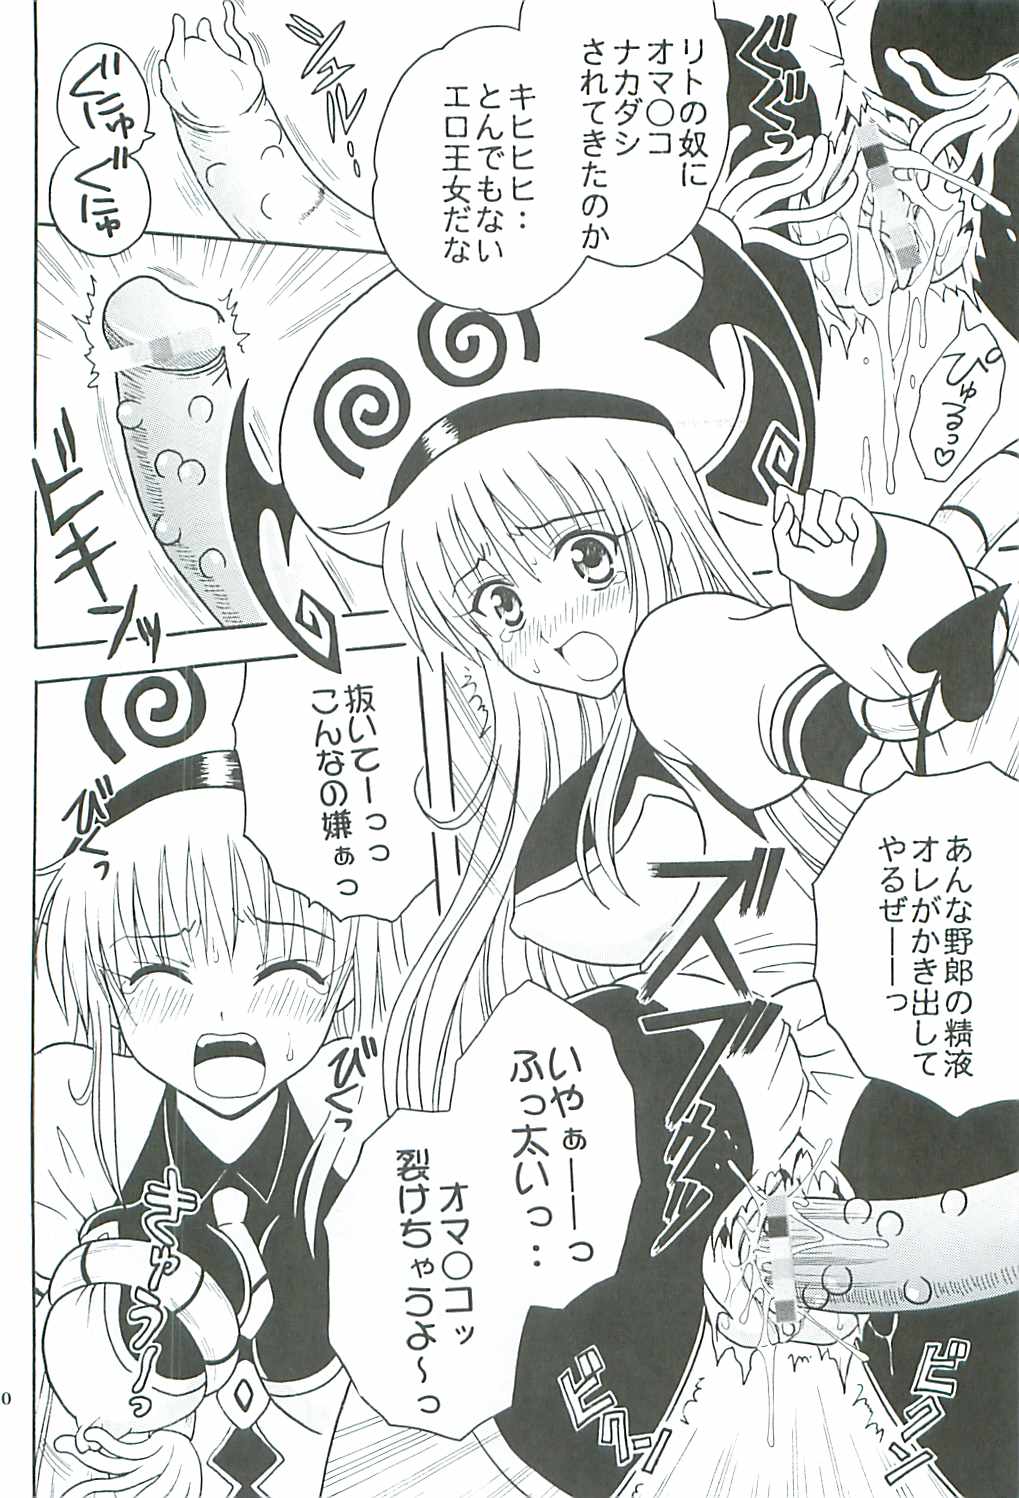 [St.Rio] ToLOVE Ryu 2 (To Love Ru) page 31 full